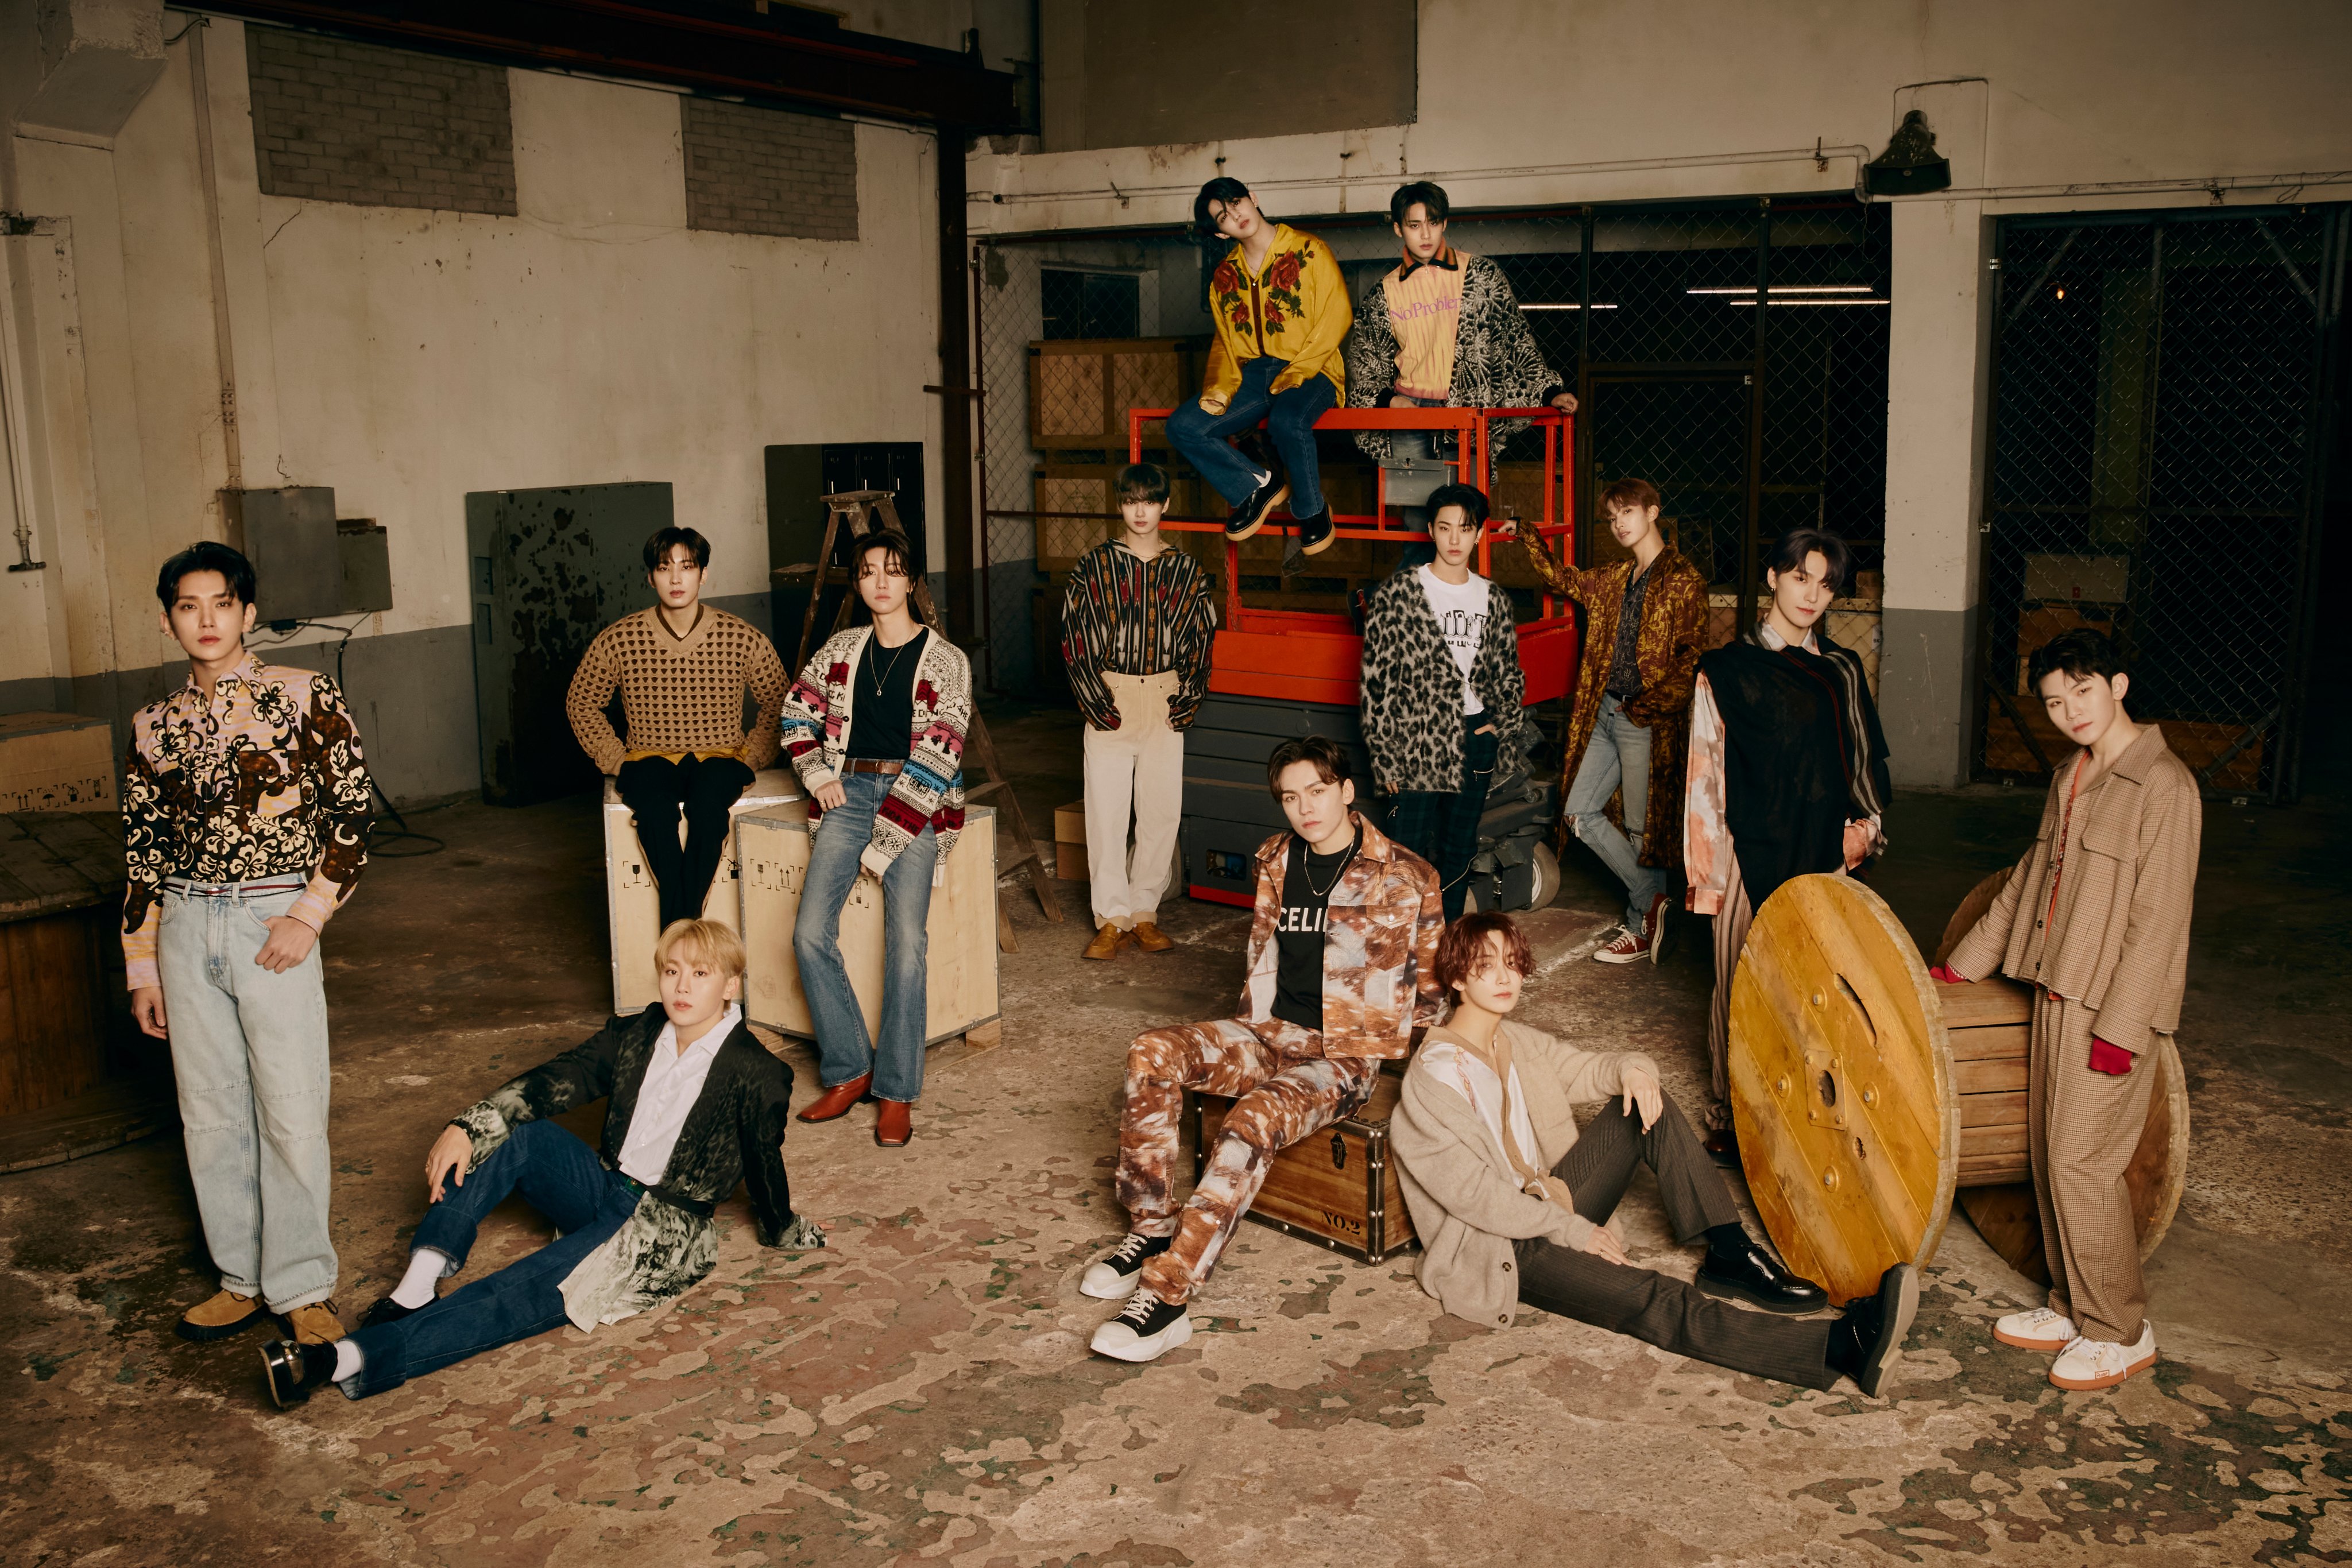 seventeen-to-make-comeback-in-japan-with-3rd-single-hitorijanai-on-april-21